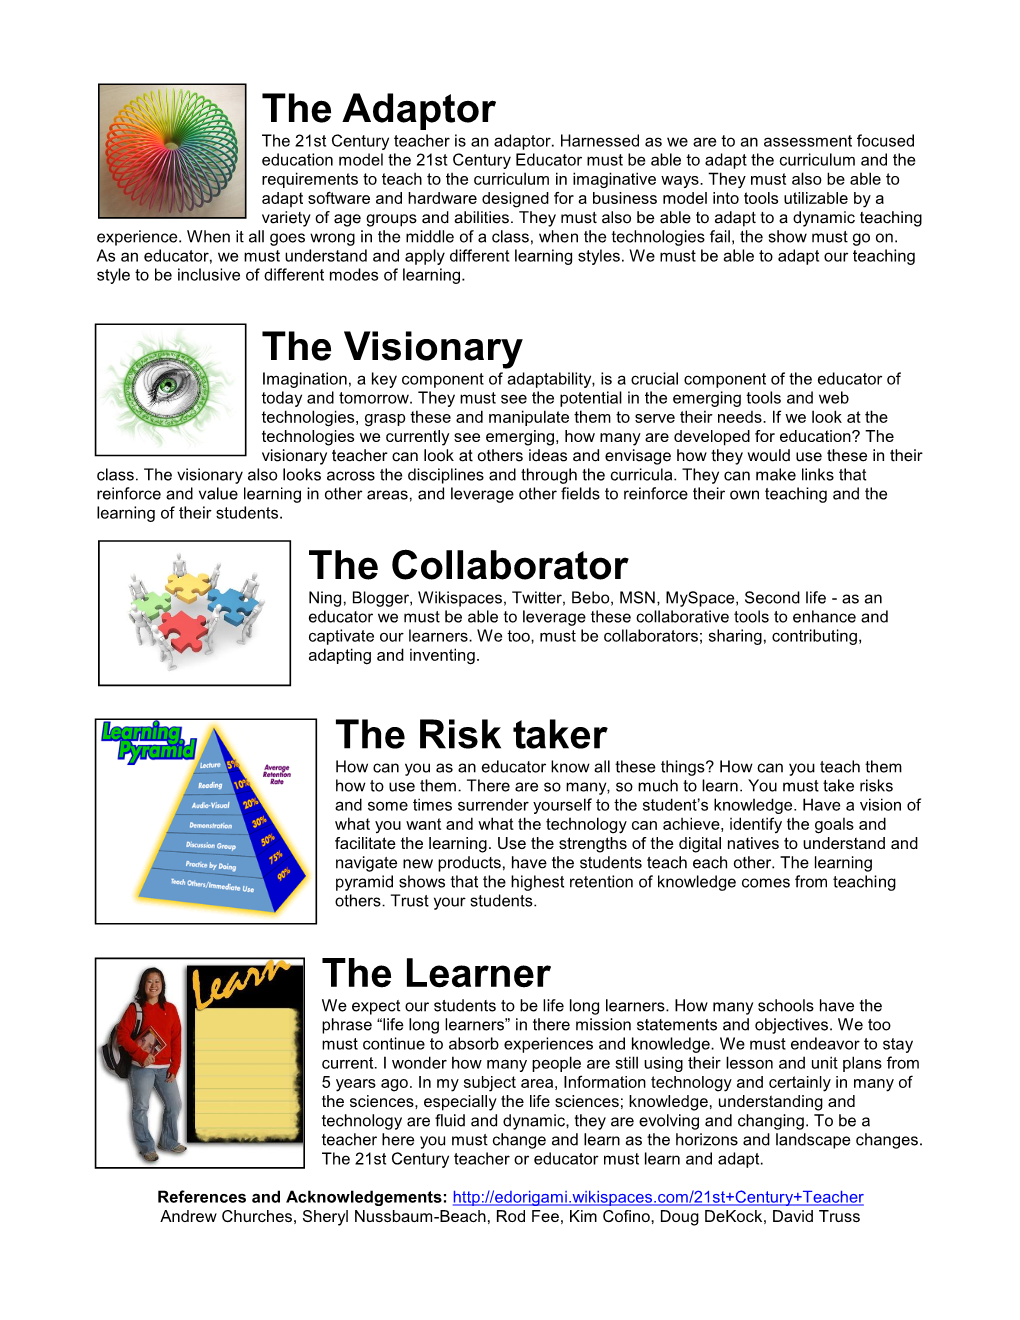 The Adaptor the Visionary the Collaborator the Risk Taker the Learner